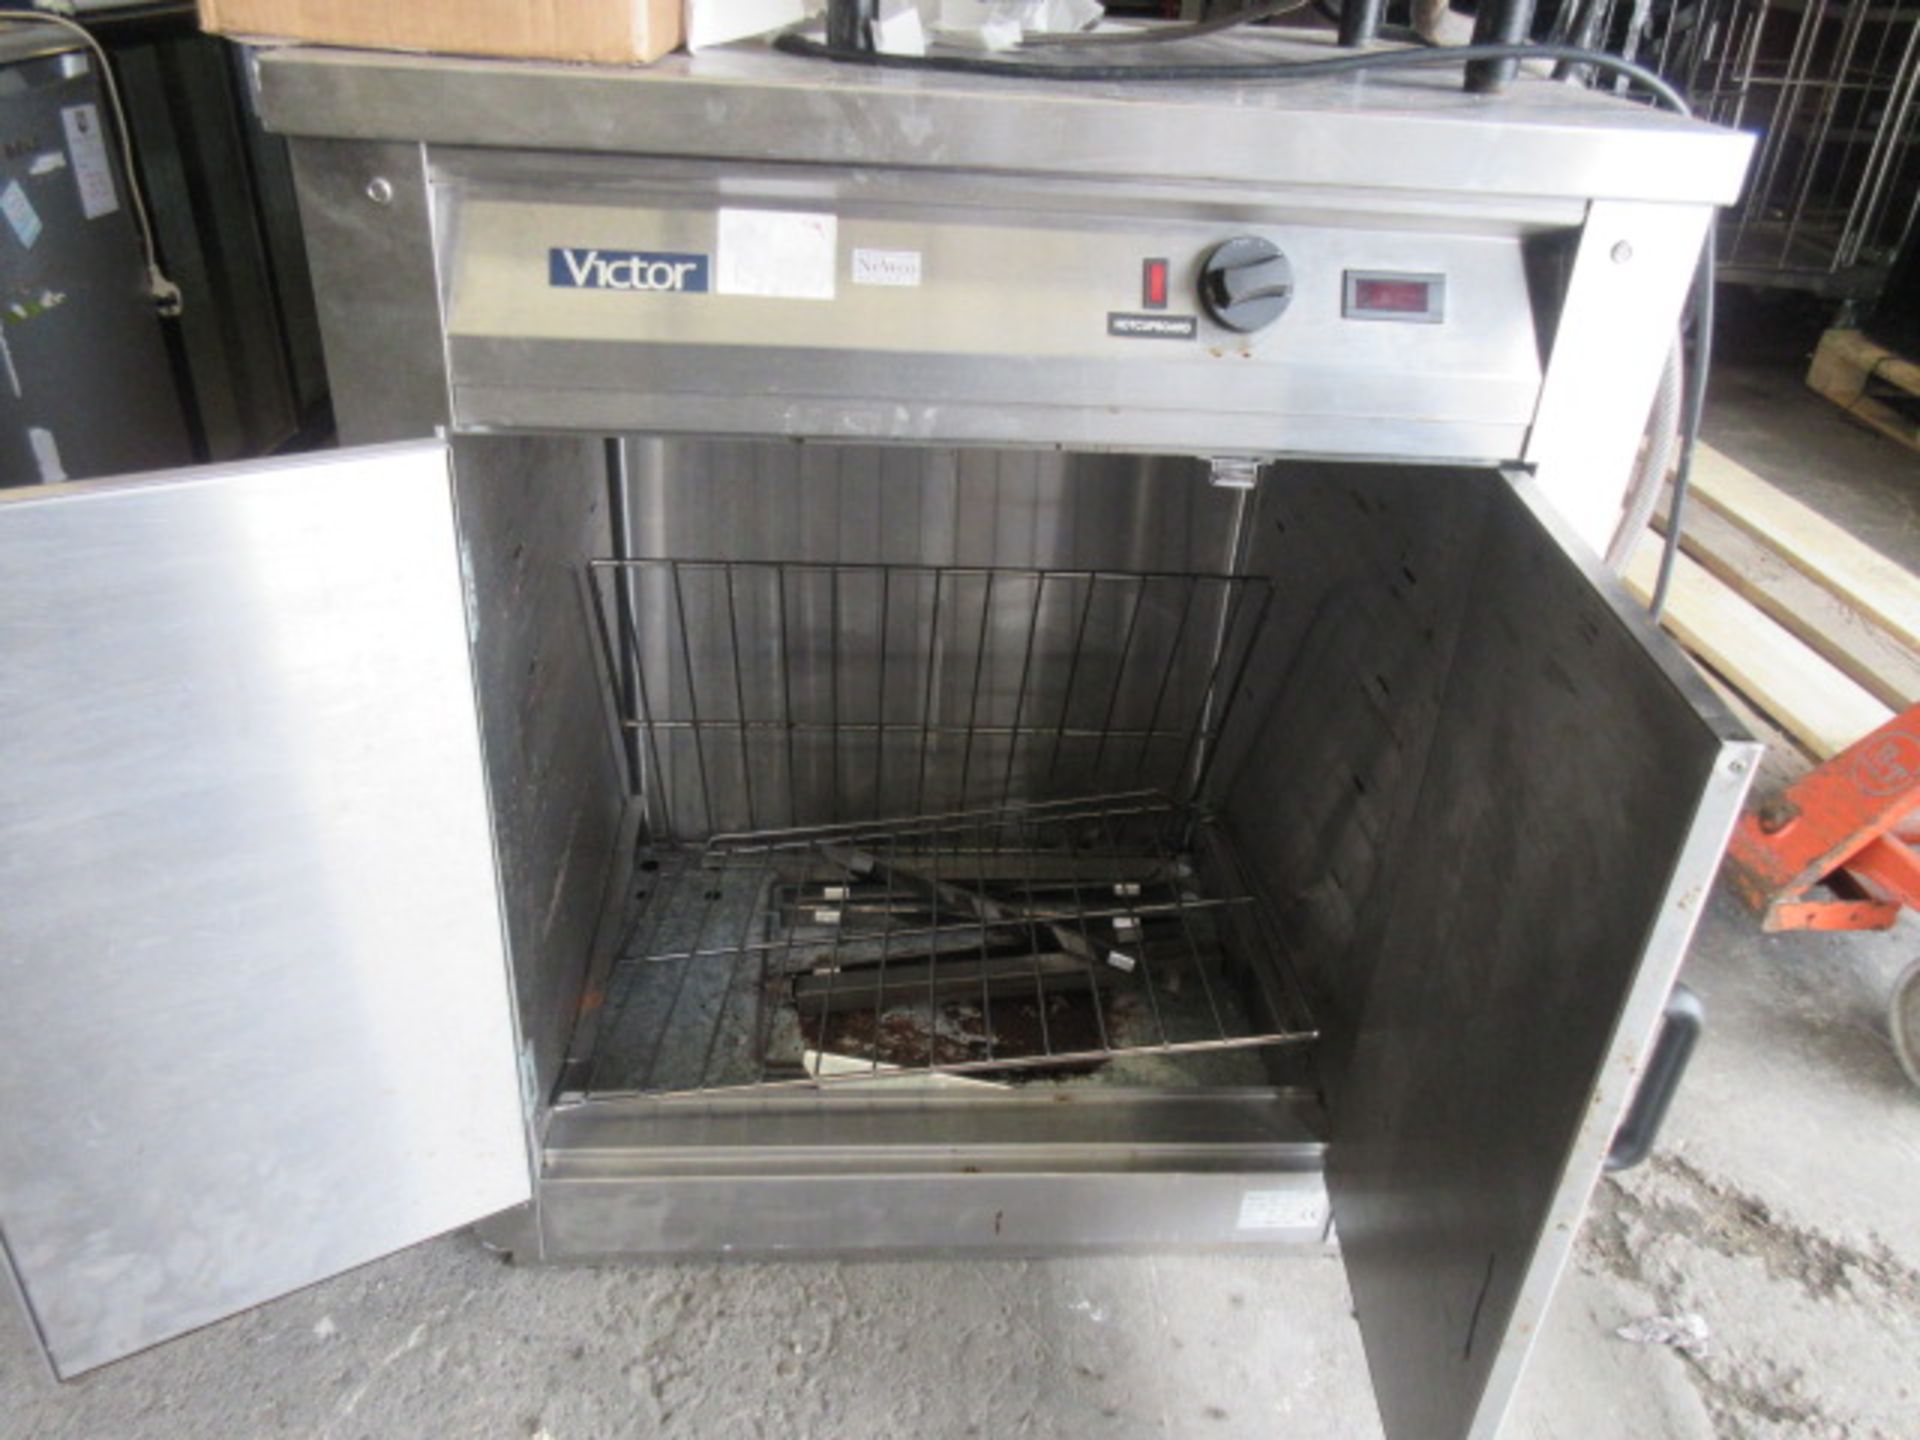 Victor HC20SS-SP Hot Cupboard. 1kw, 240v, 59Hz, size 830 x 670 x 1000mm high - Image 2 of 3